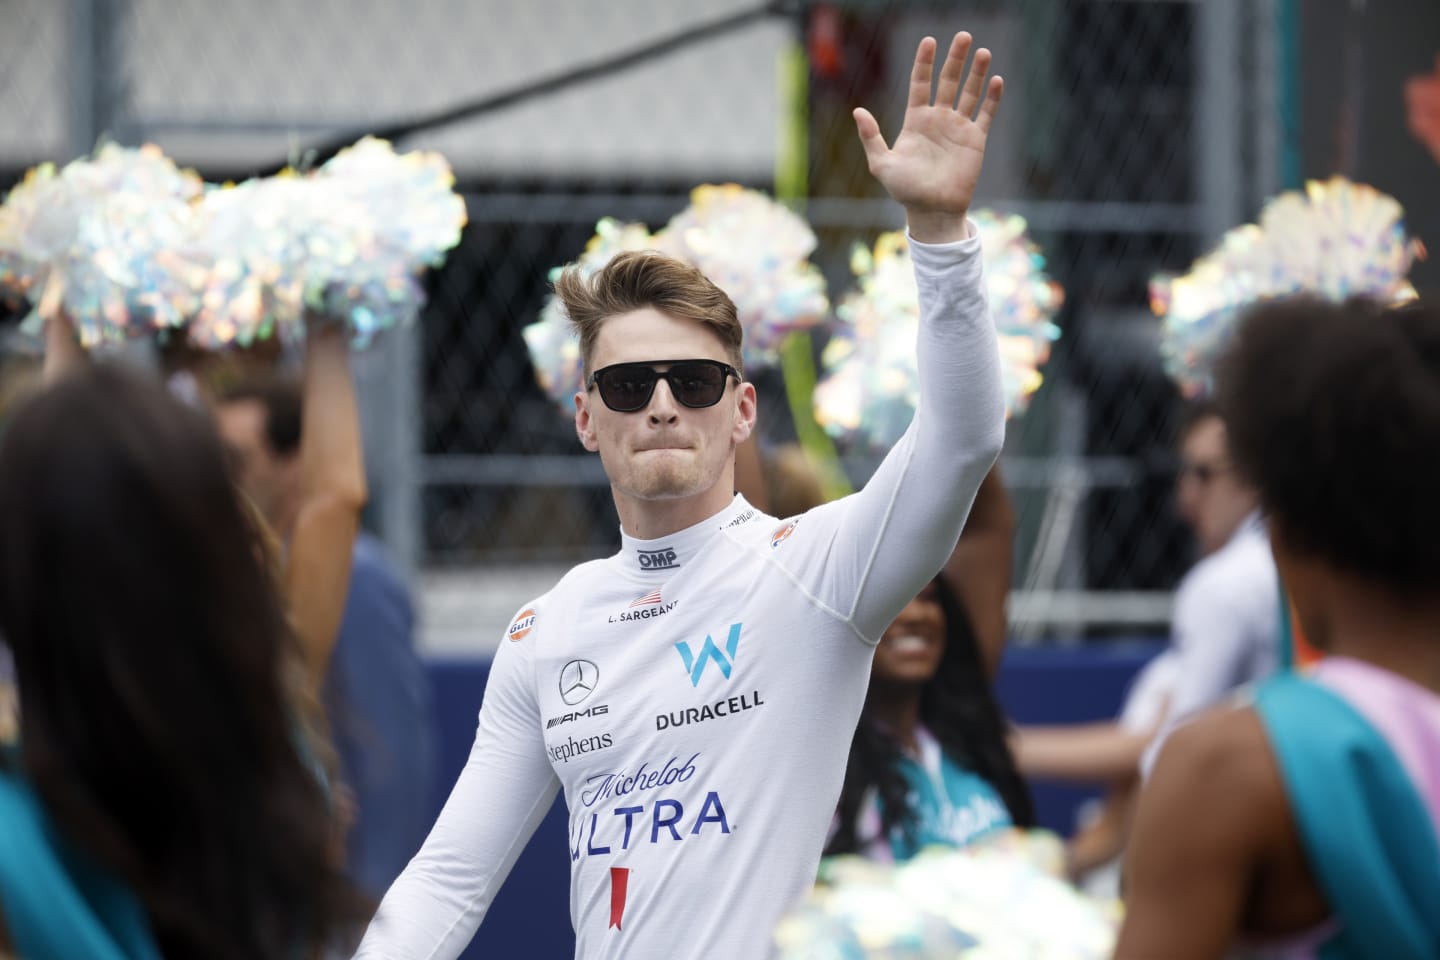 MIAMI, FLORIDA - MAY 07: Logan Sargeant of United States and Williams waves to the crowd from the grid prior to the F1 Grand Prix of Miami at Miami International Autodrome on May 07, 2023 in Miami, Florida. (Photo by Jared C. Tilton/Getty Images)